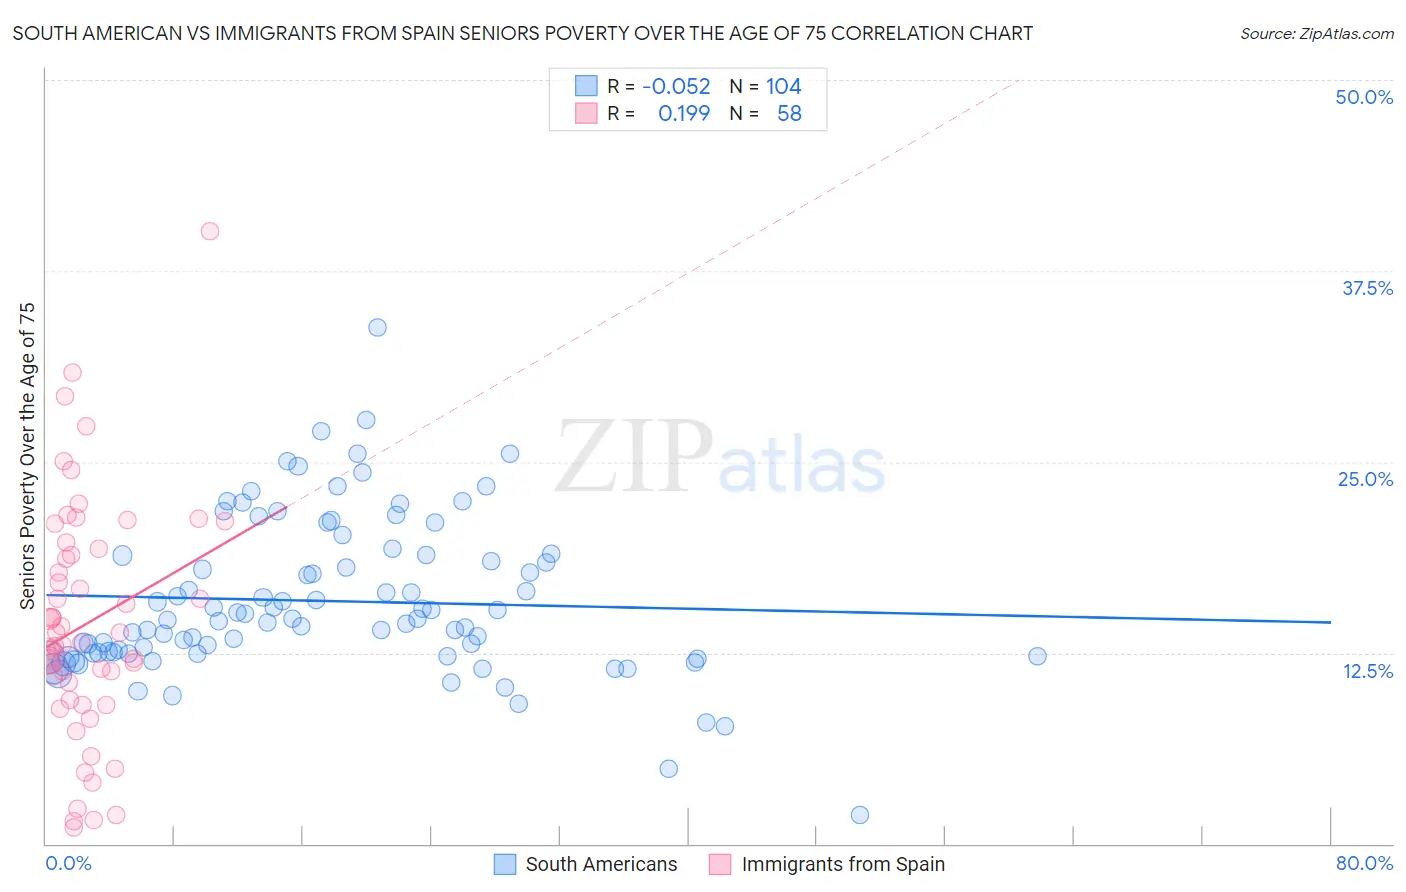 South American vs Immigrants from Spain Seniors Poverty Over the Age of 75